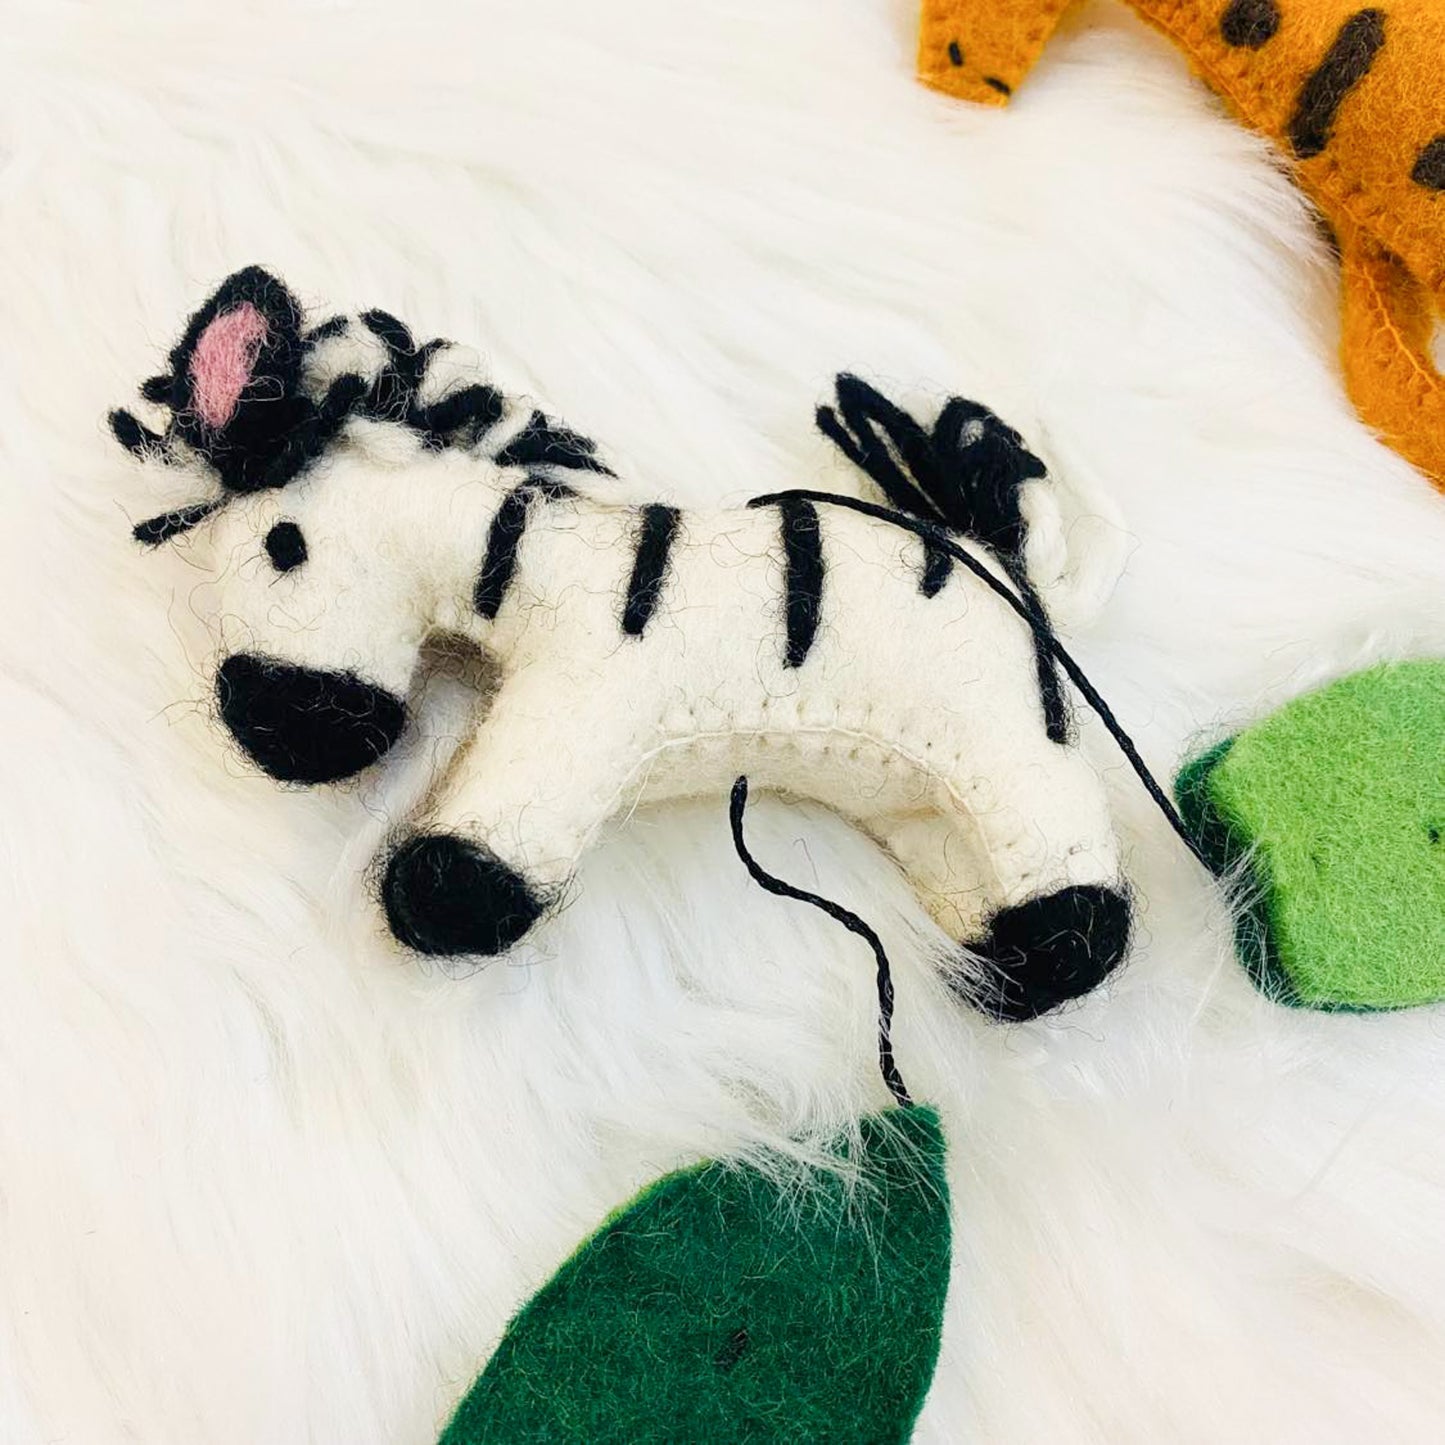 Felted Animal Jungle Hanging with Bells